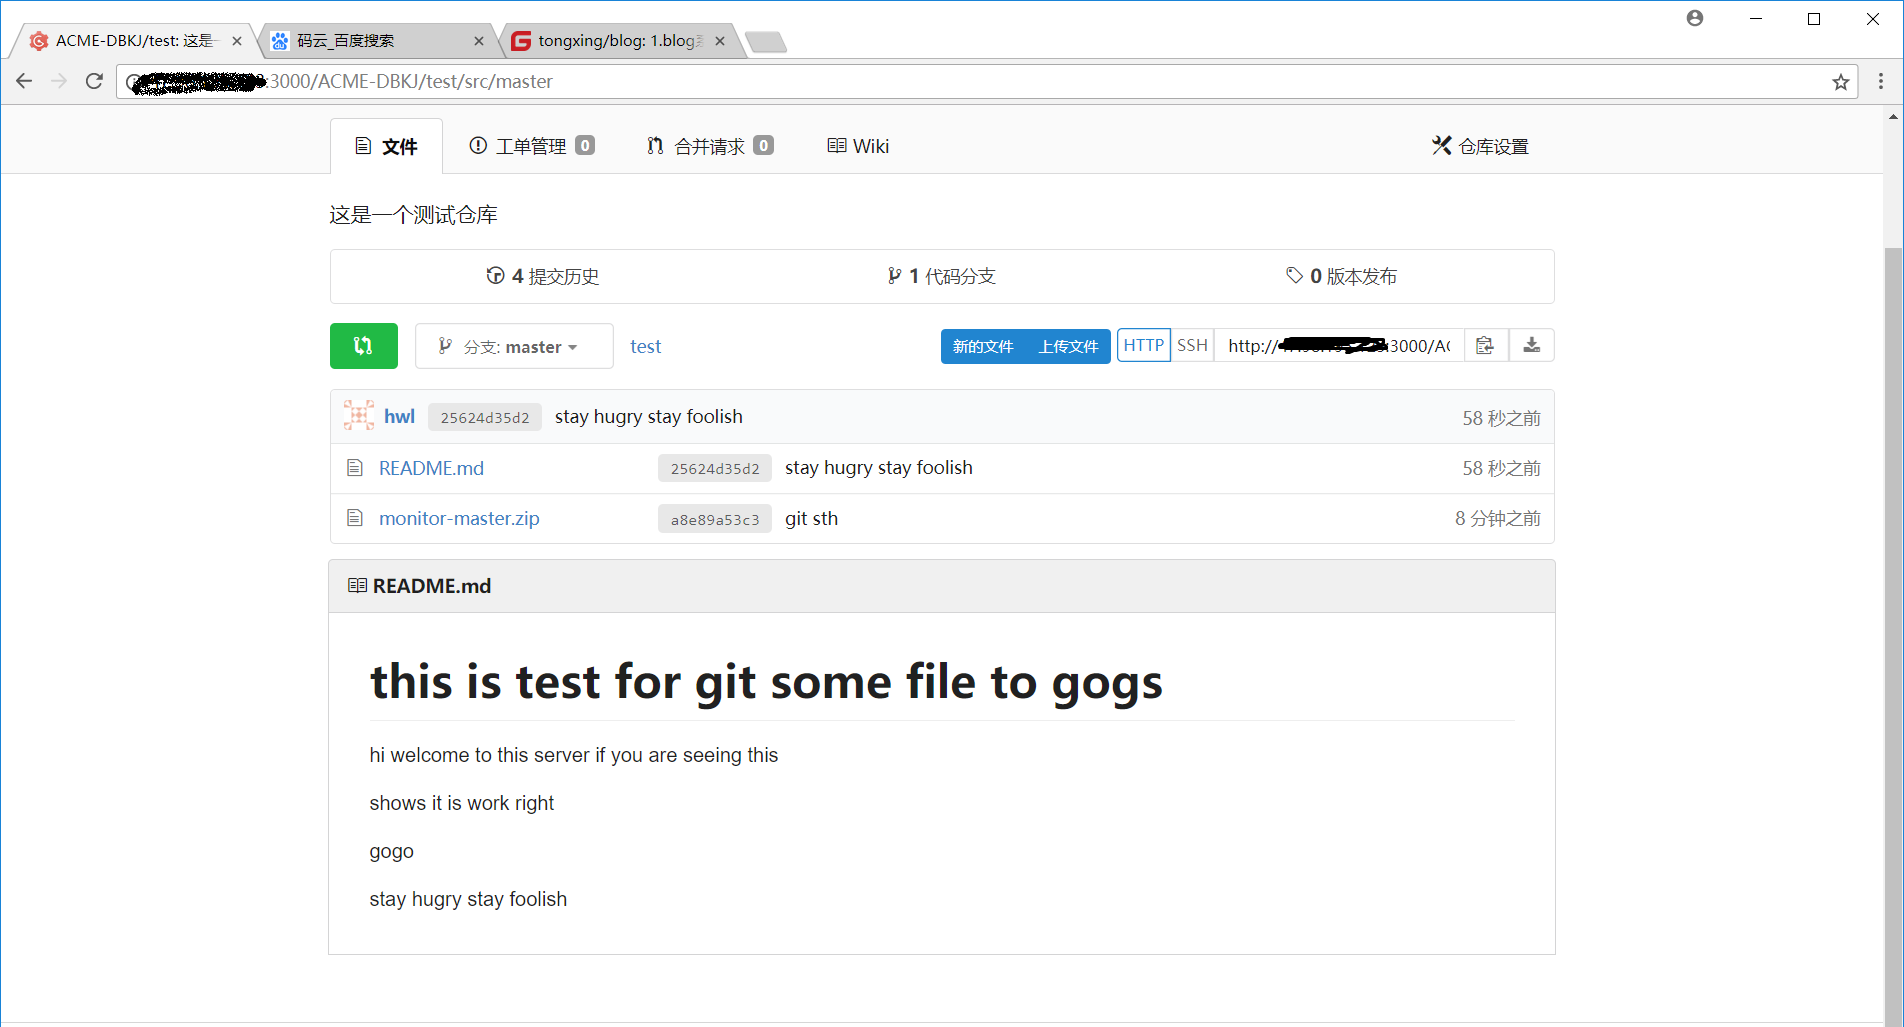 how to install gitlab on our own server